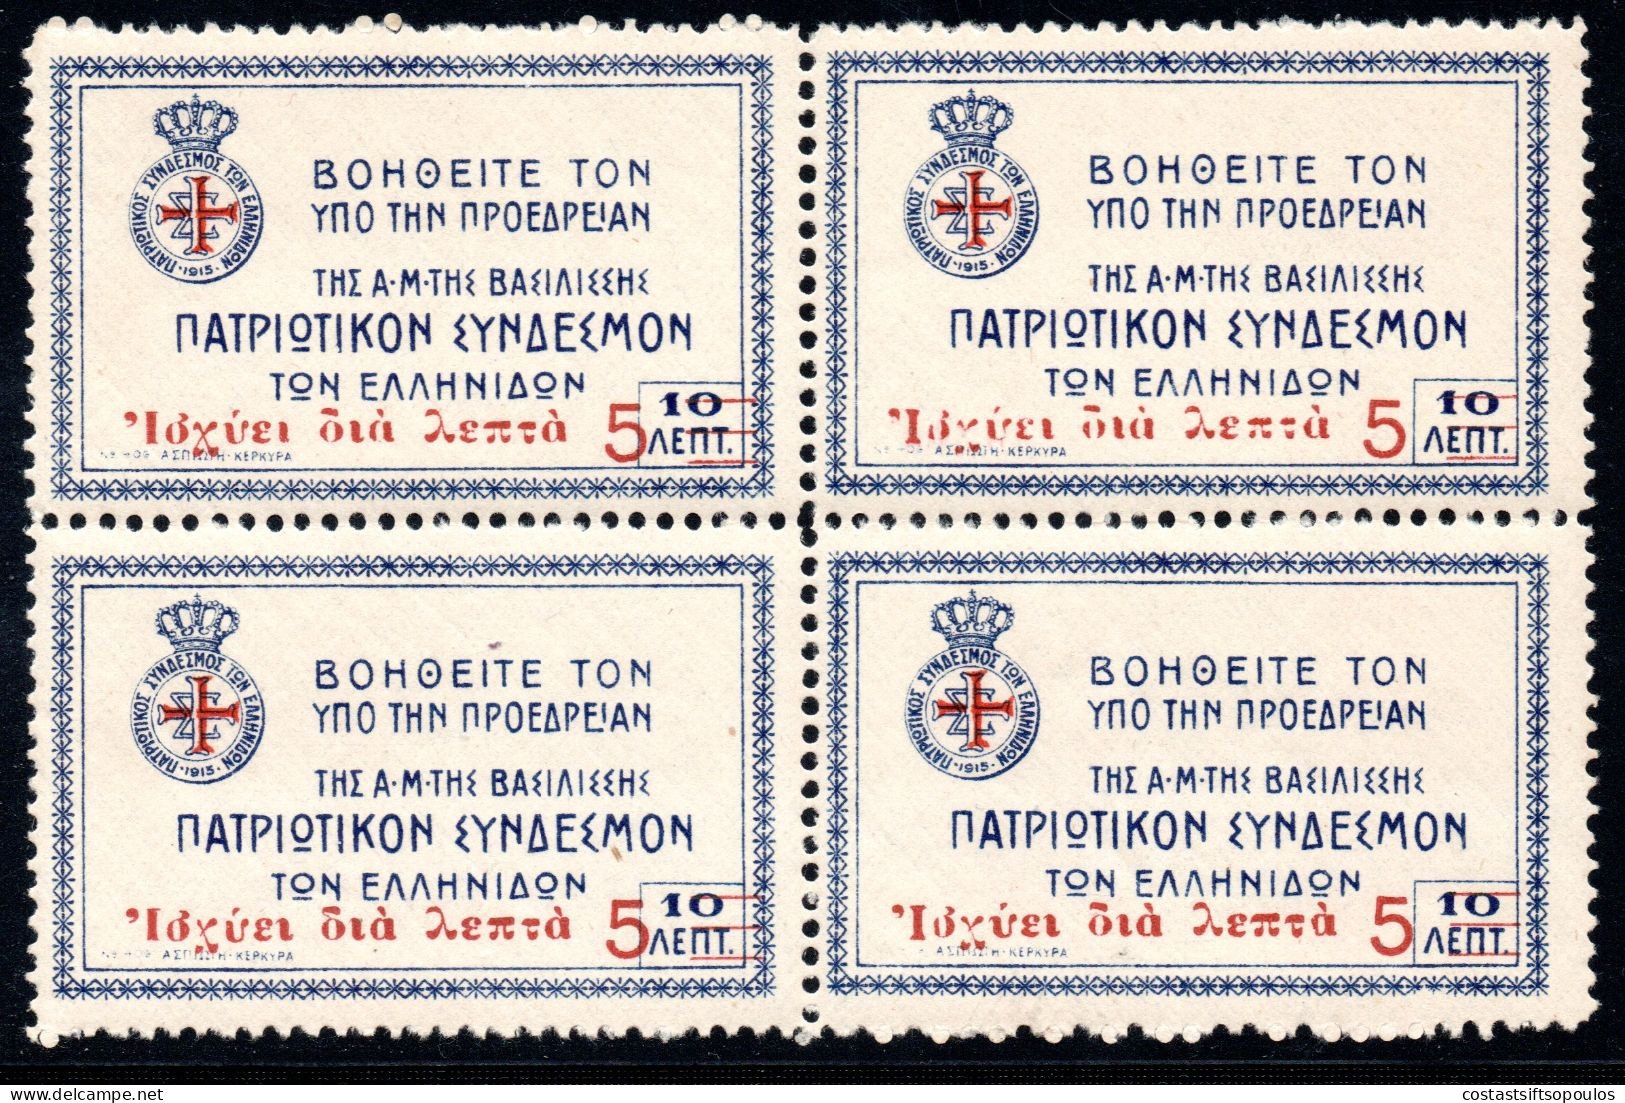 1787.GREECE.1922 CHARITY 5 L / 10 L. HELLAS  C56a MNH BLOCK OF 4. DOES NOT LOOK GENUINE,SOLD AS IS,SPACE FILLER. - Beneficenza